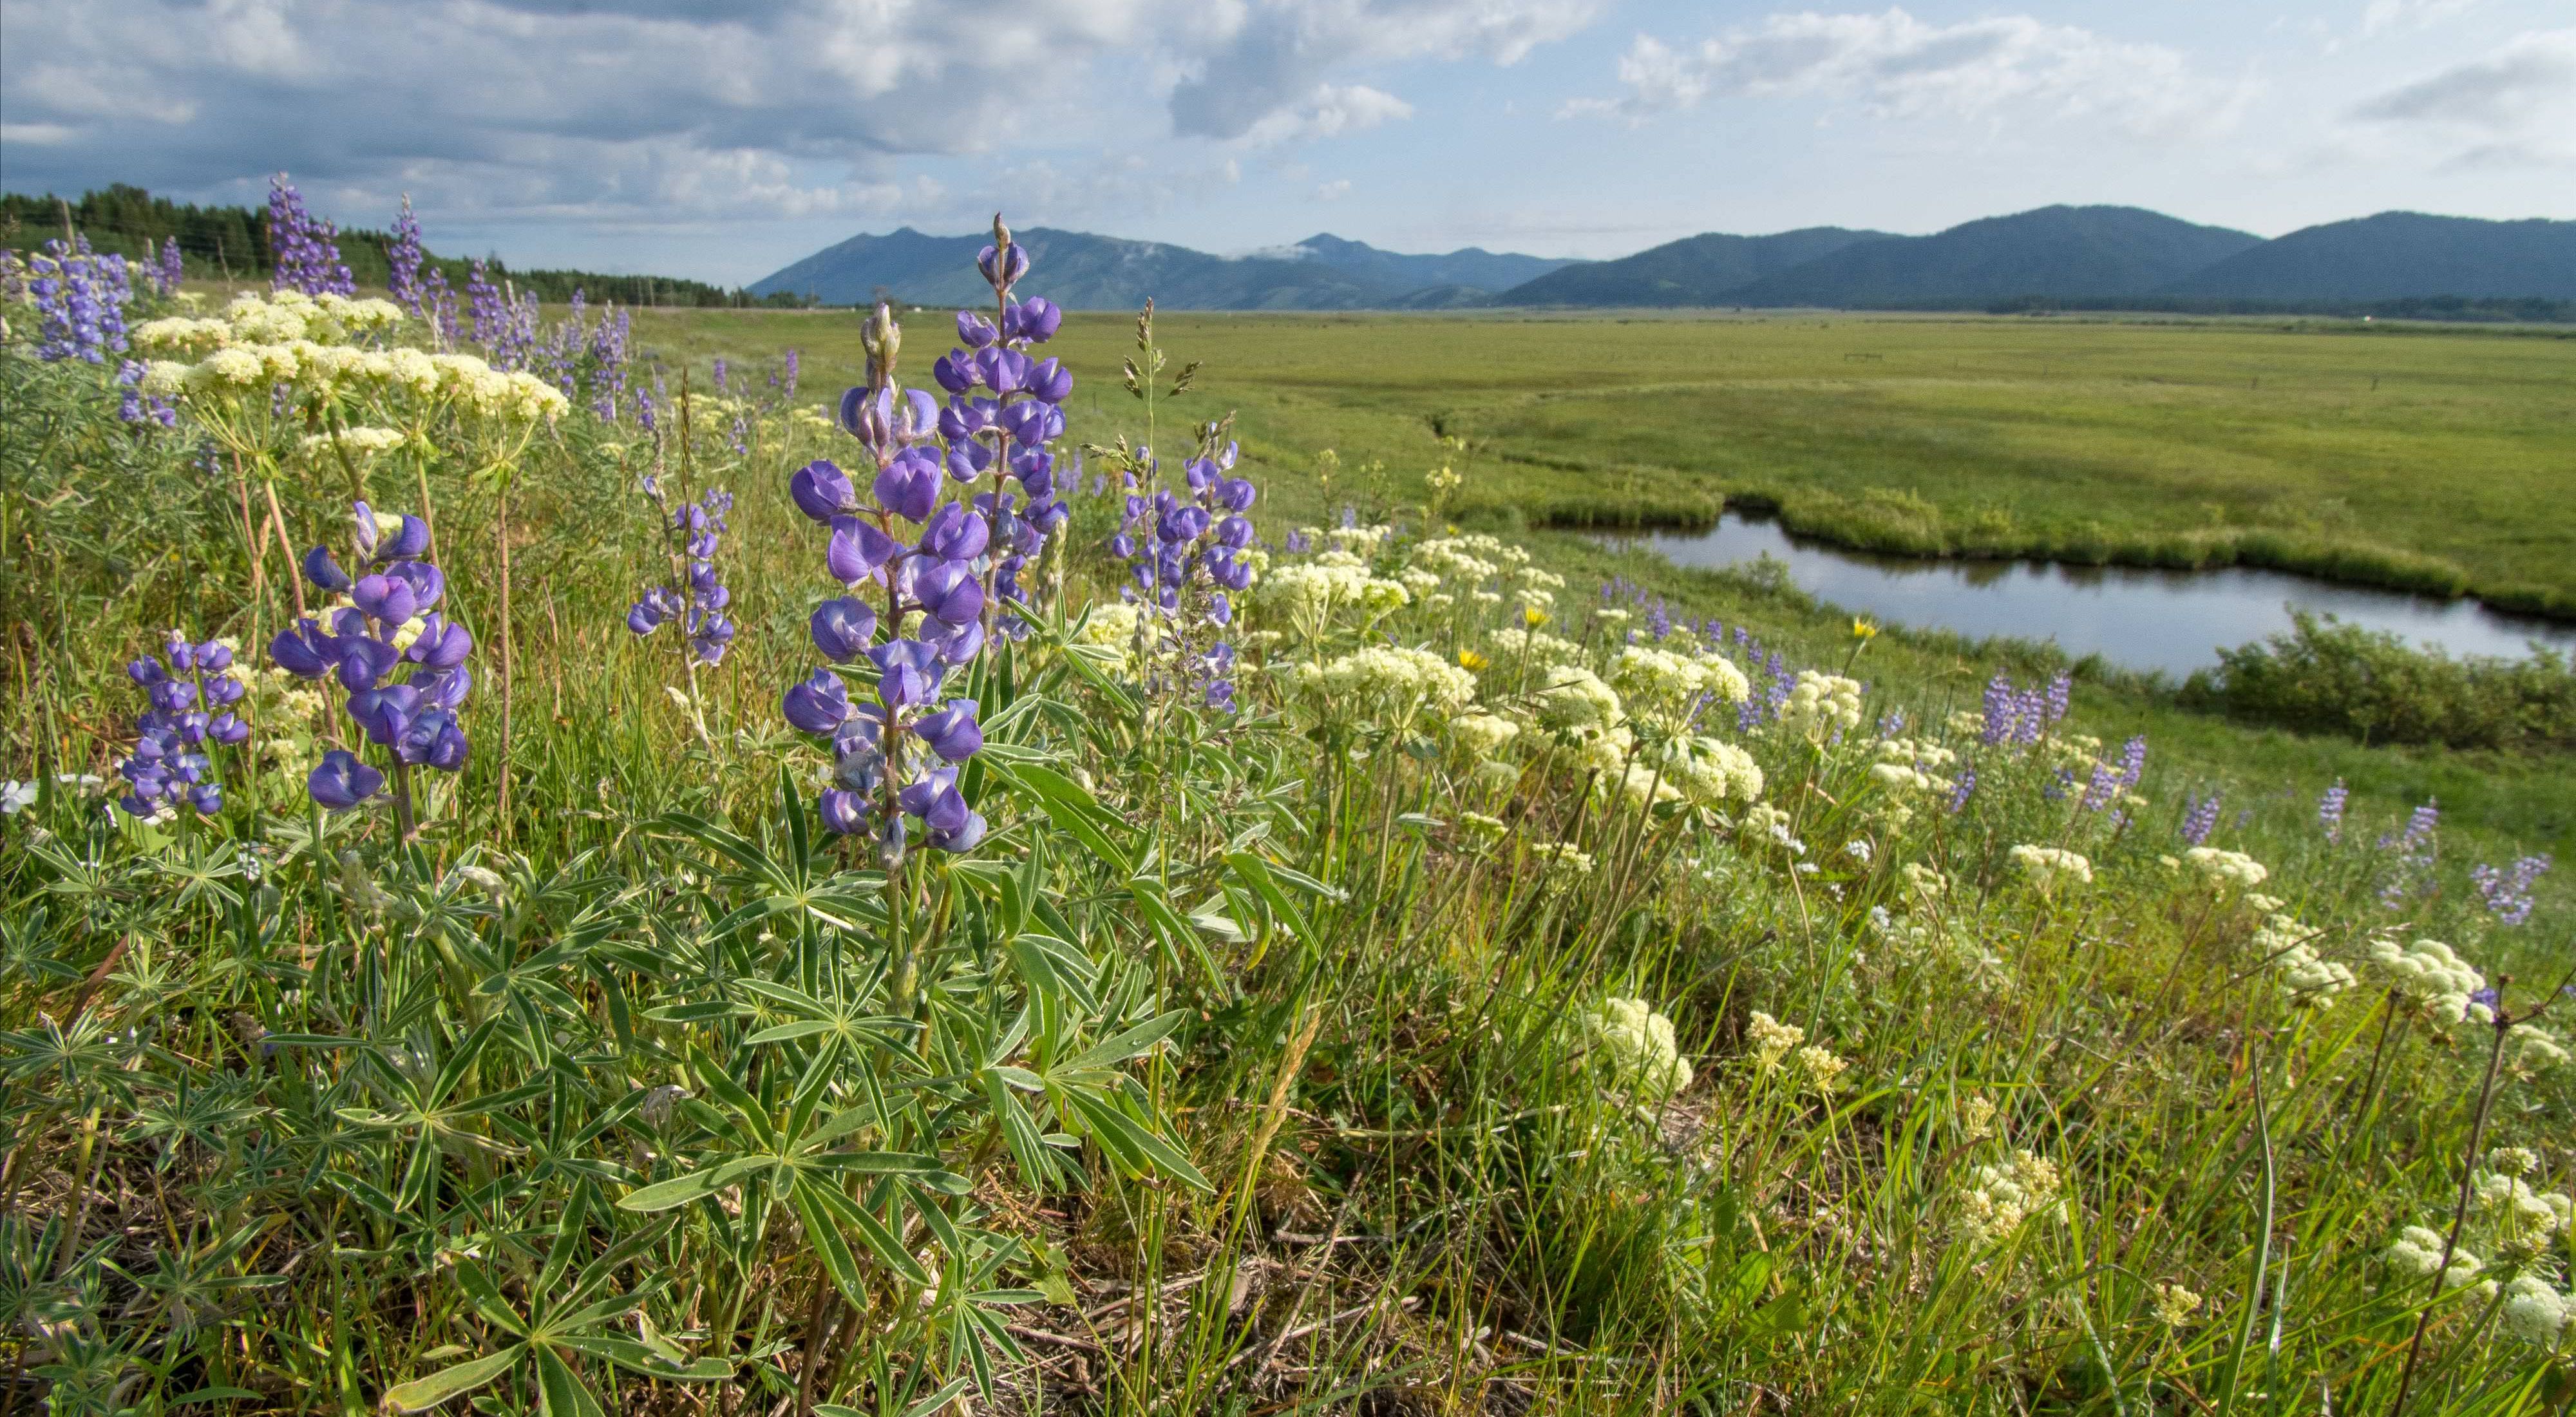 Purple camas flowers and wetlands with mountains in distance.